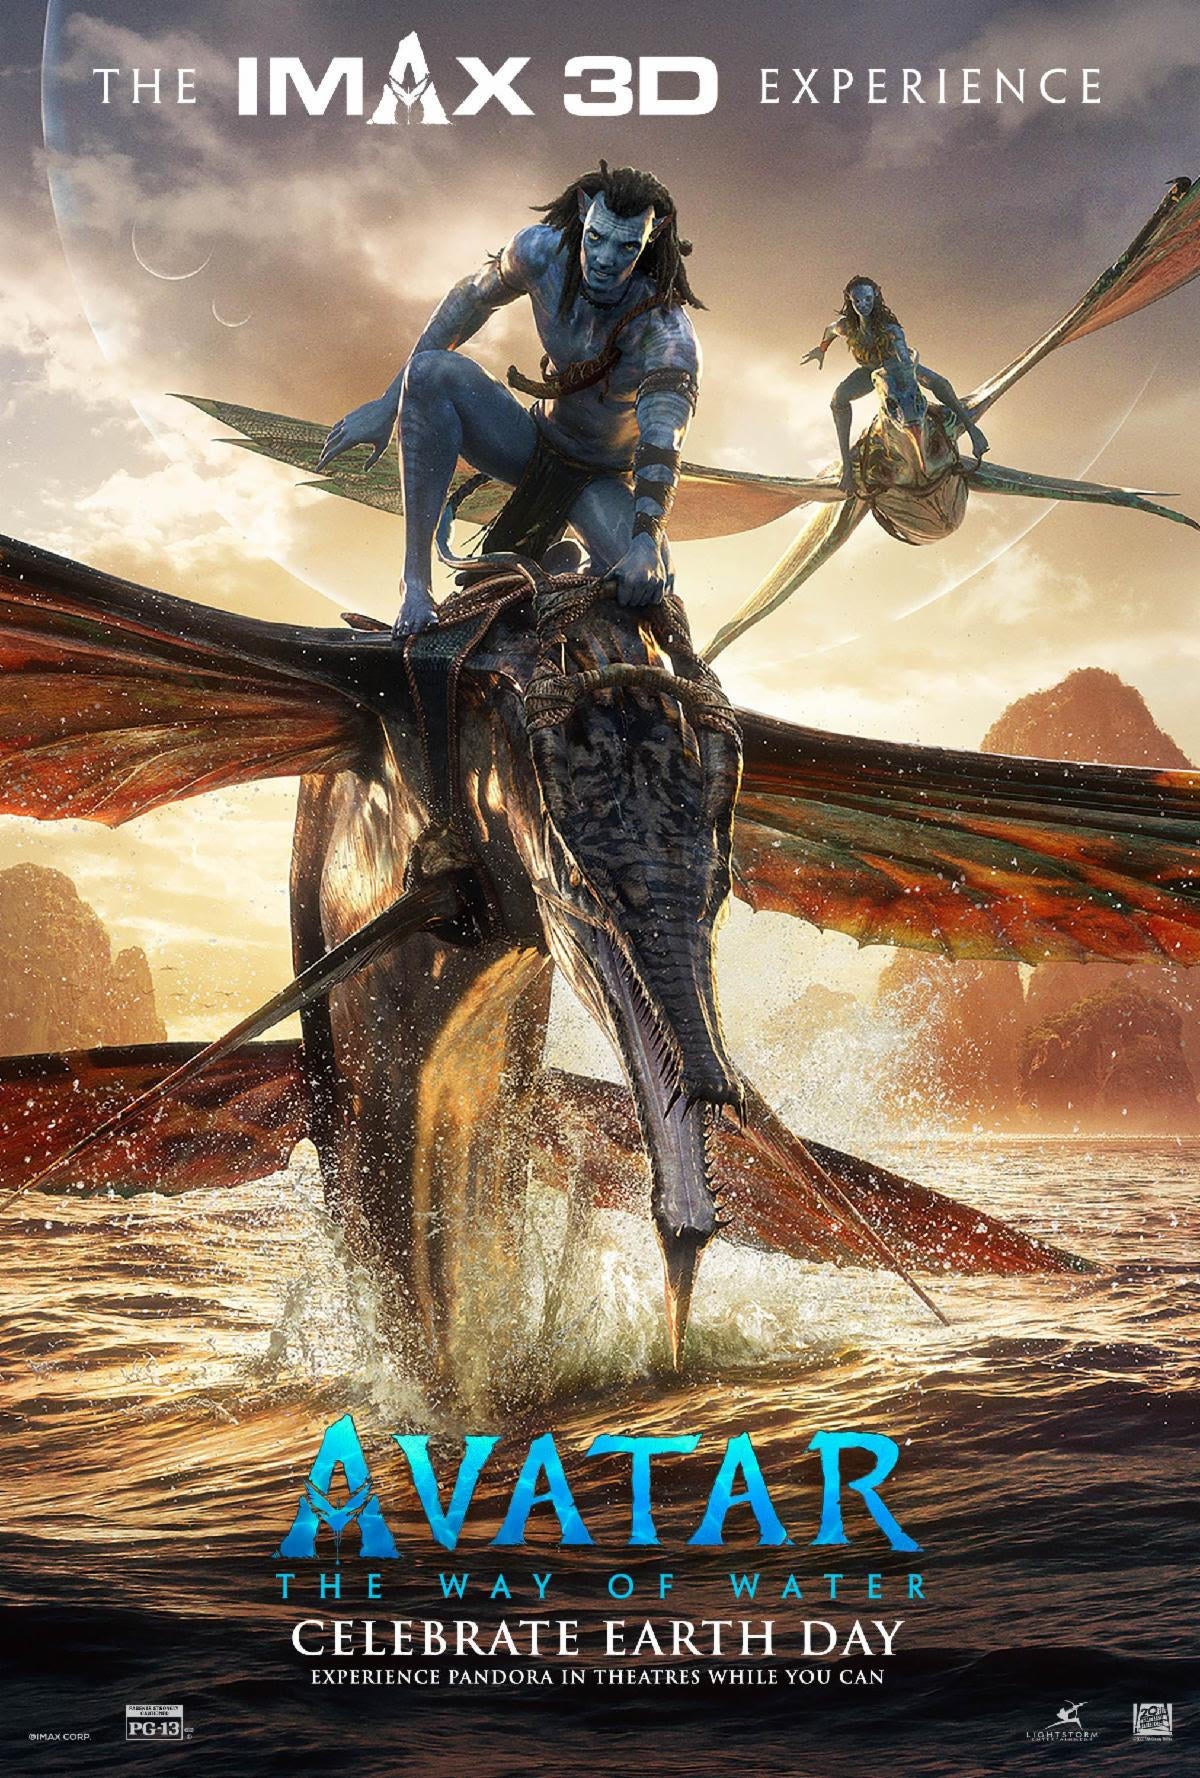 Avatar The Way Of Water 3D